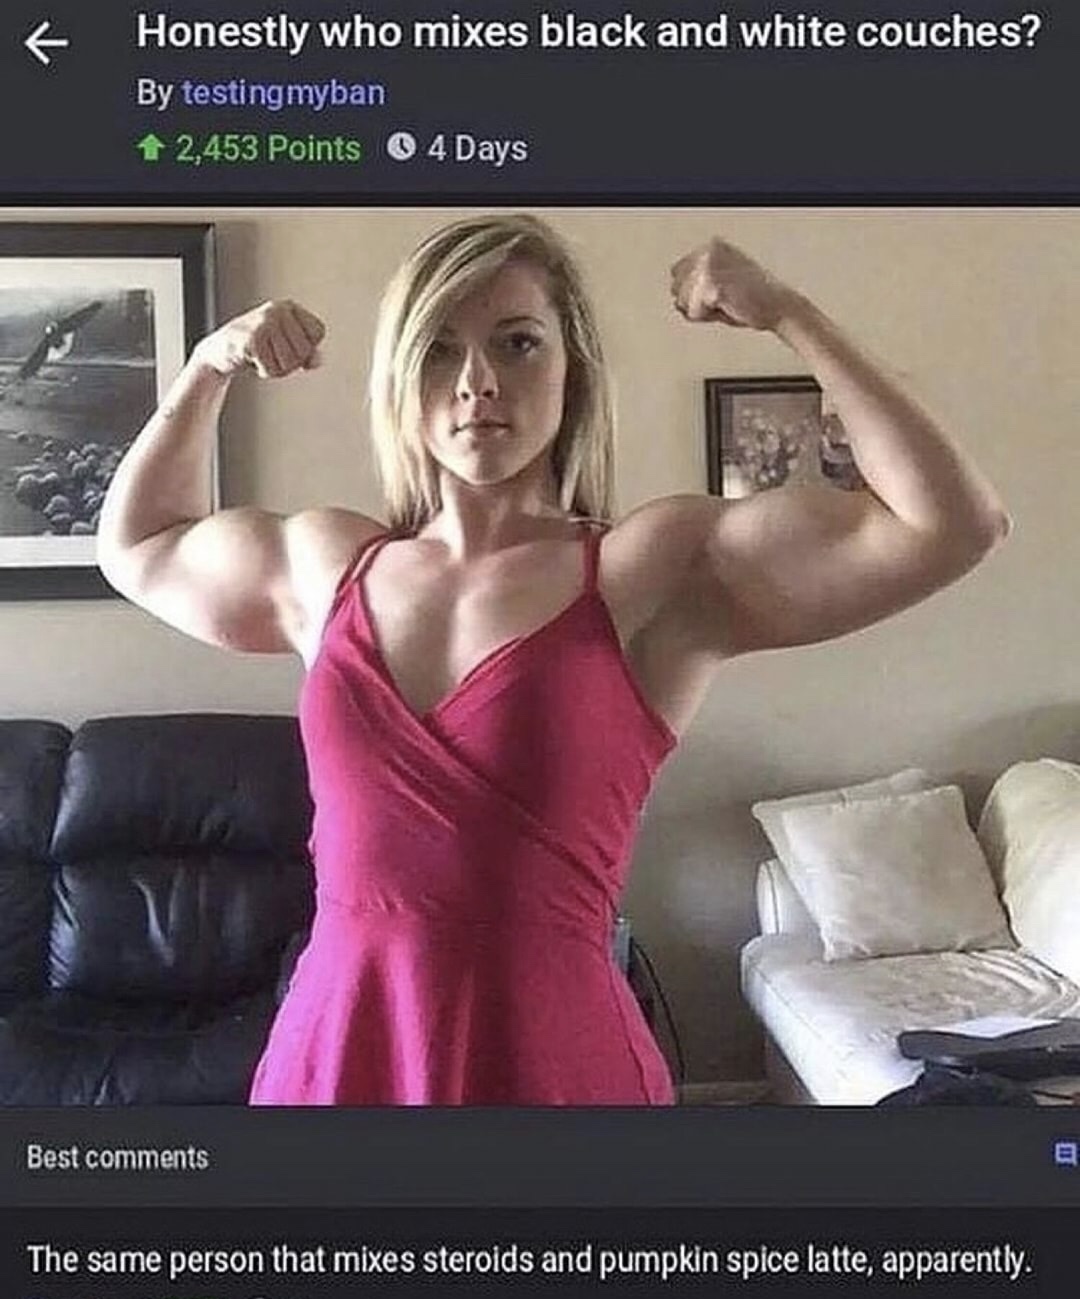 meme stream - comments for bodybuilding facebook - Honestly who mixes black and white couches? By testing myban 2,453 Points o 4 Days Best The same person that mixes steroids and pumpkin spice latte, apparently